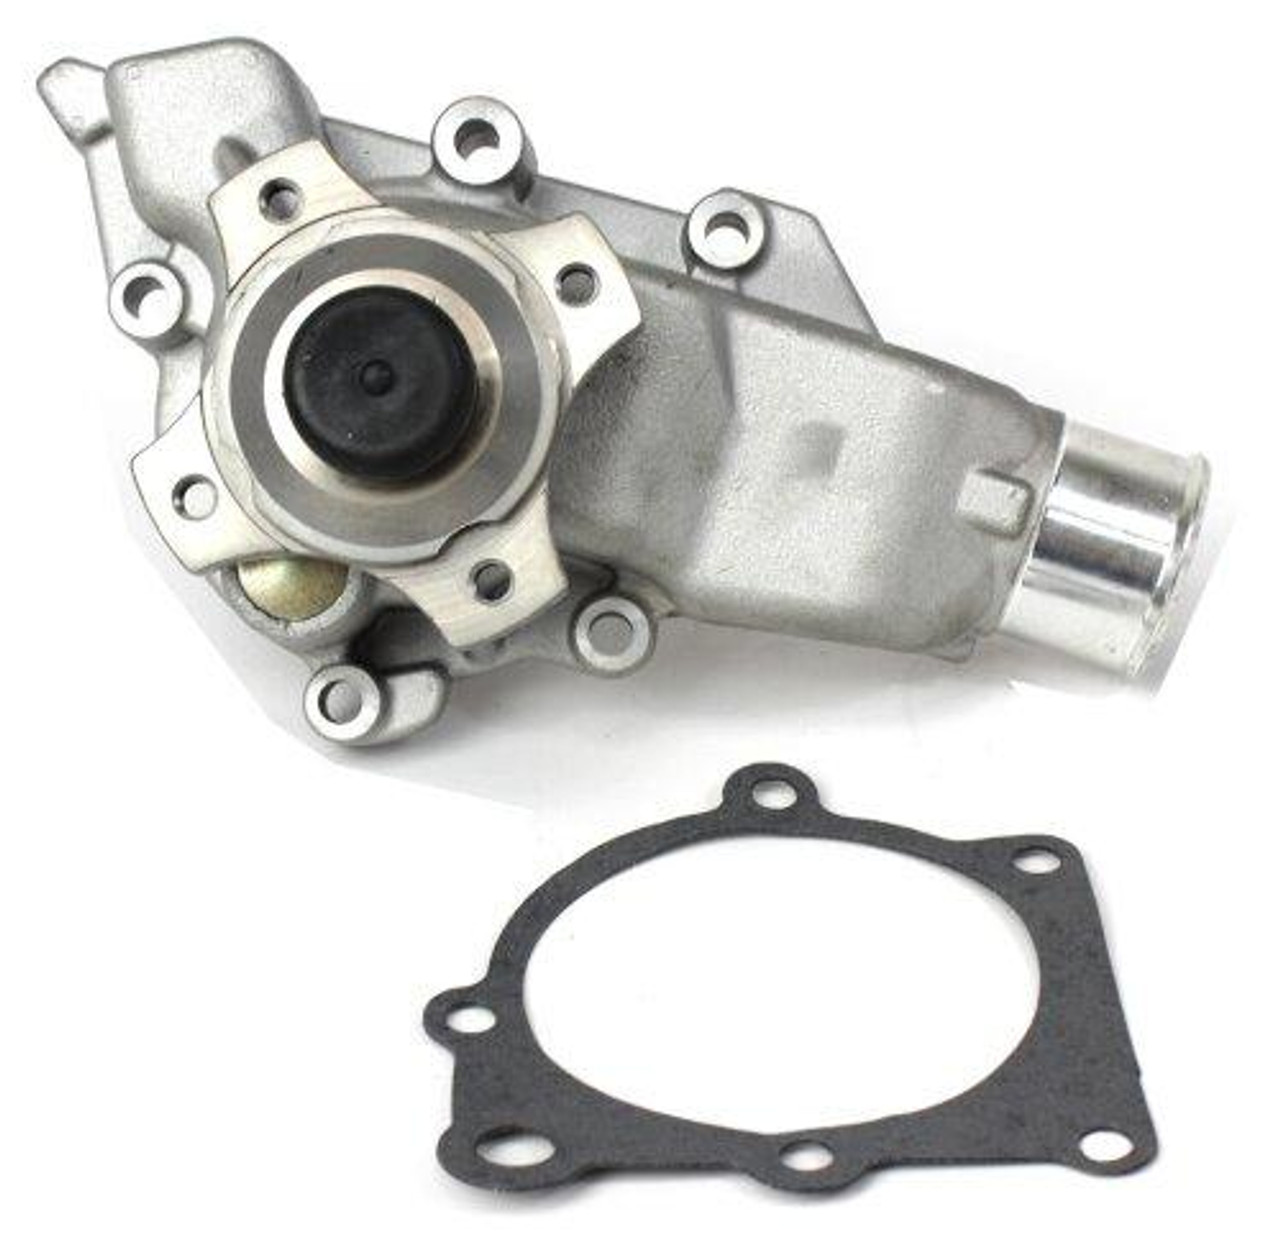 Water Pump - 2001 Jeep Grand Cherokee 4.0L Engine Parts # WP1123ZE3